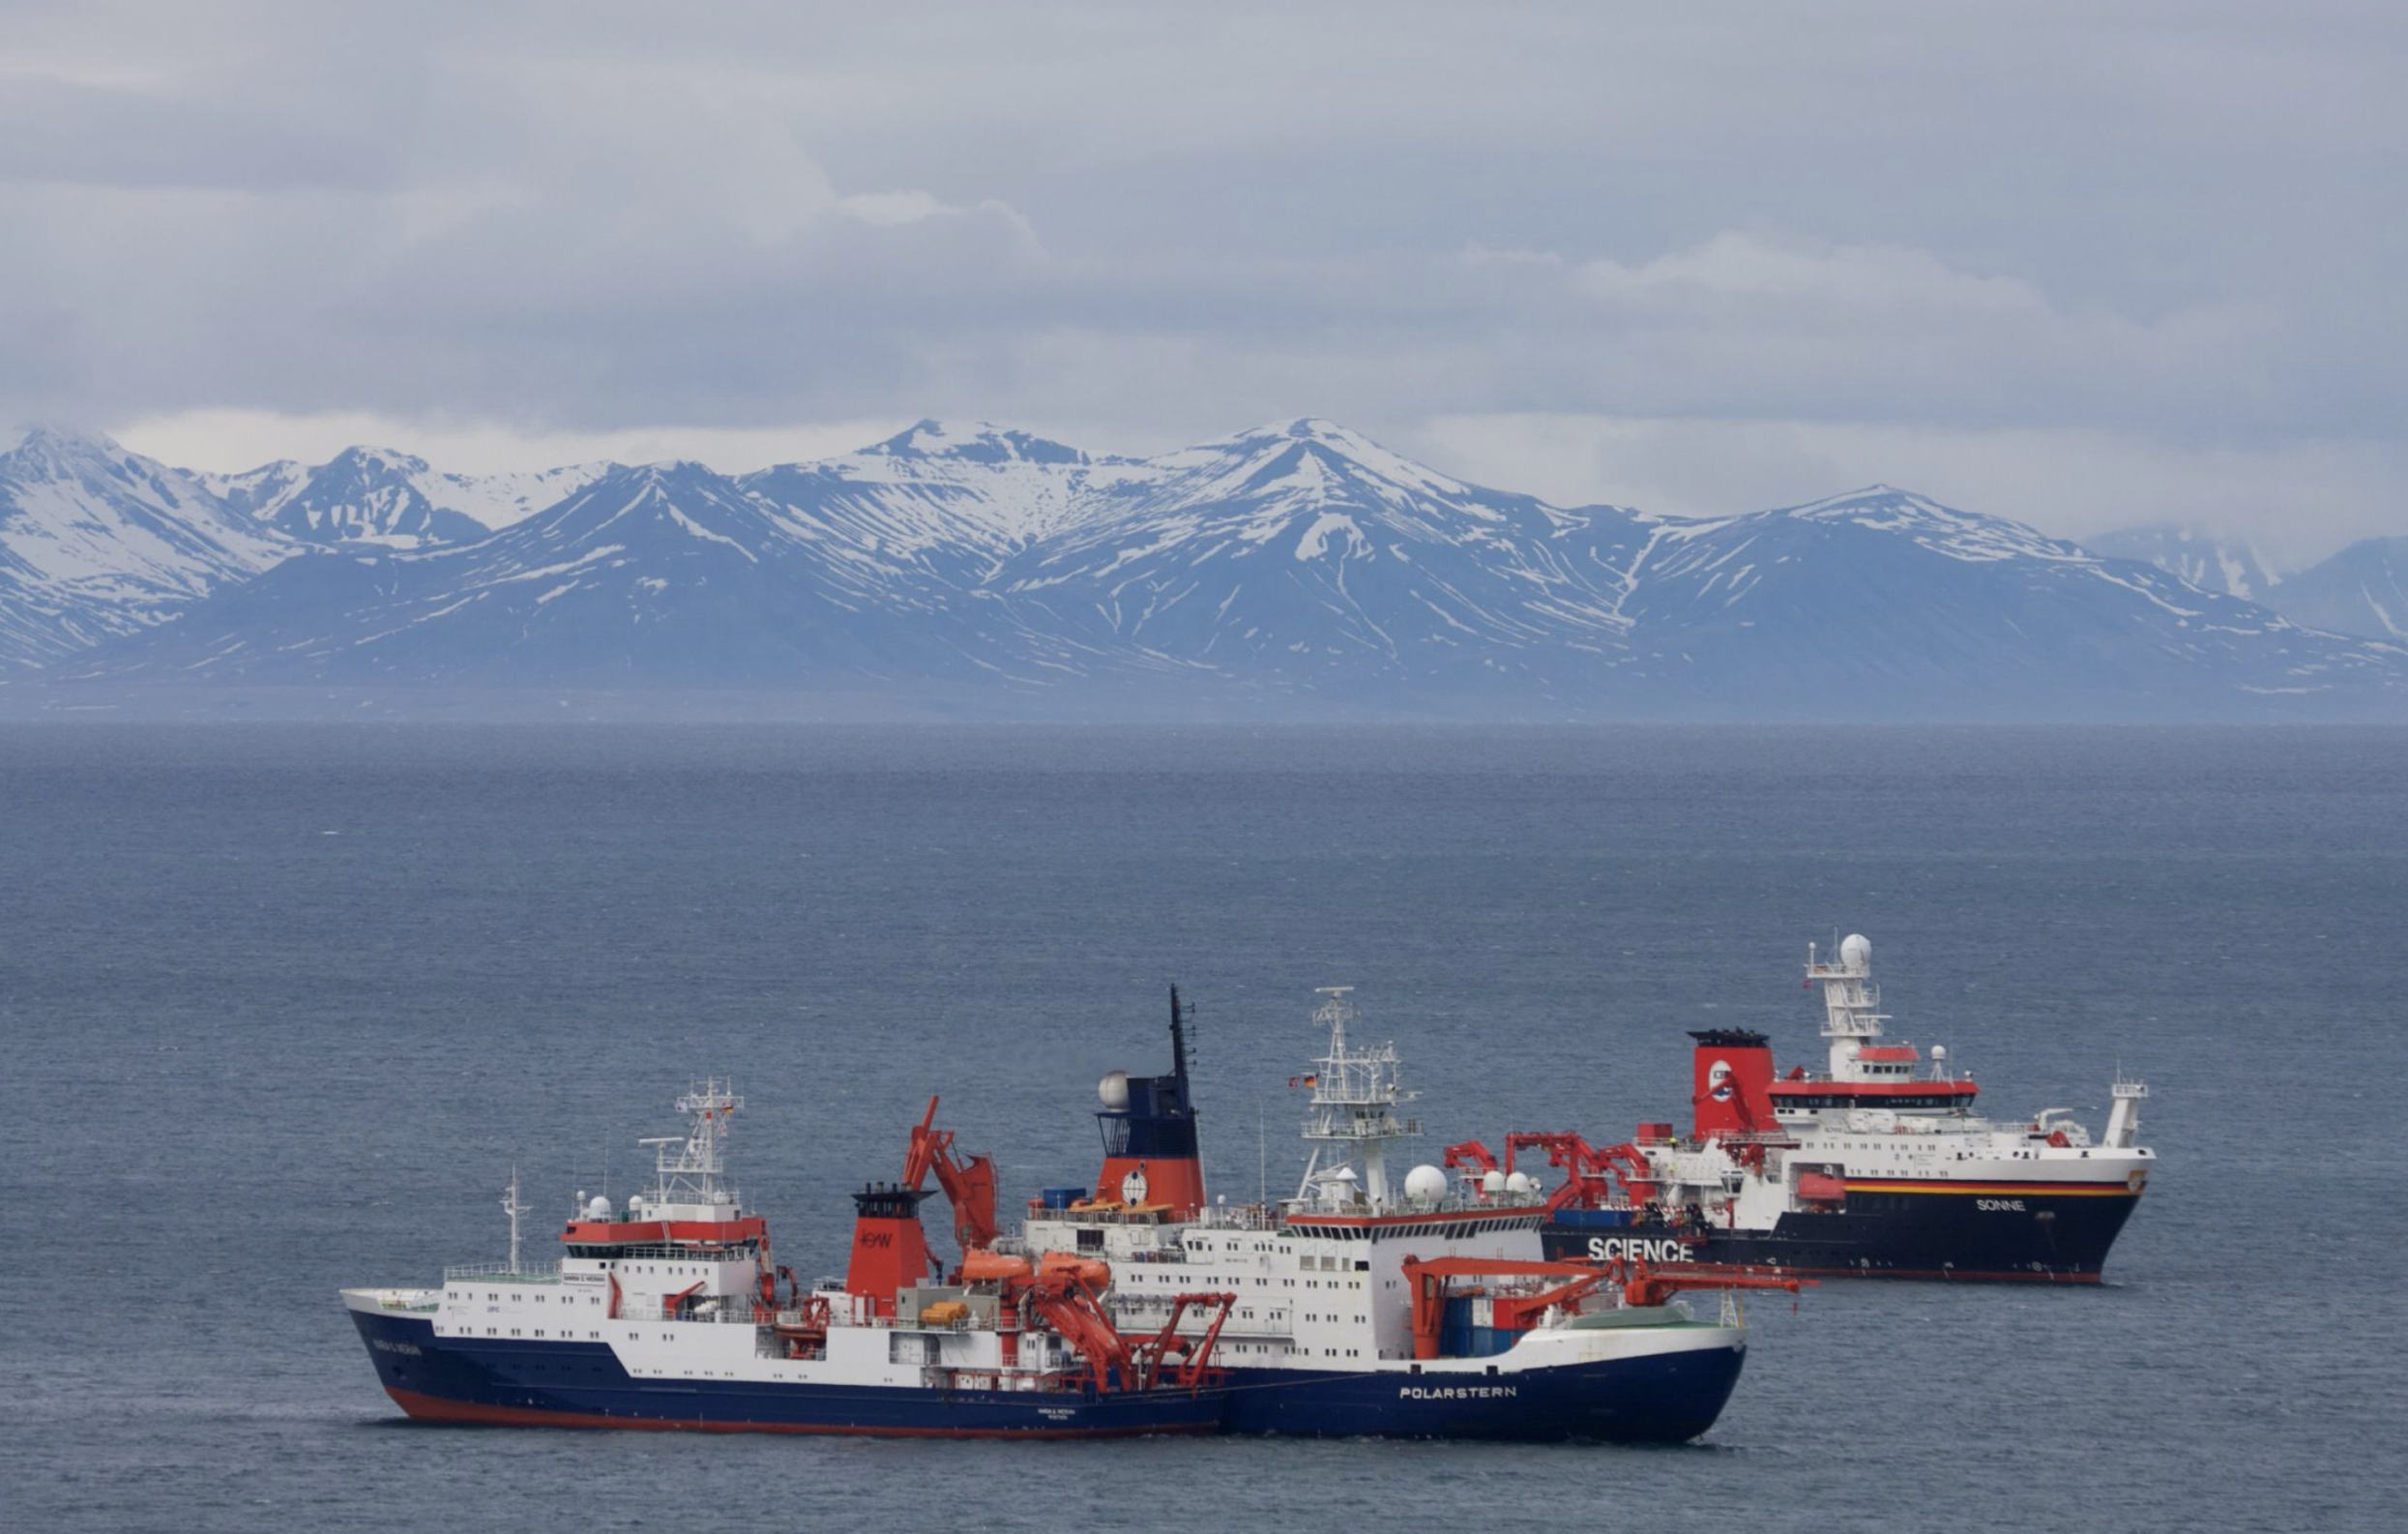 Polarstern and its resupply ships